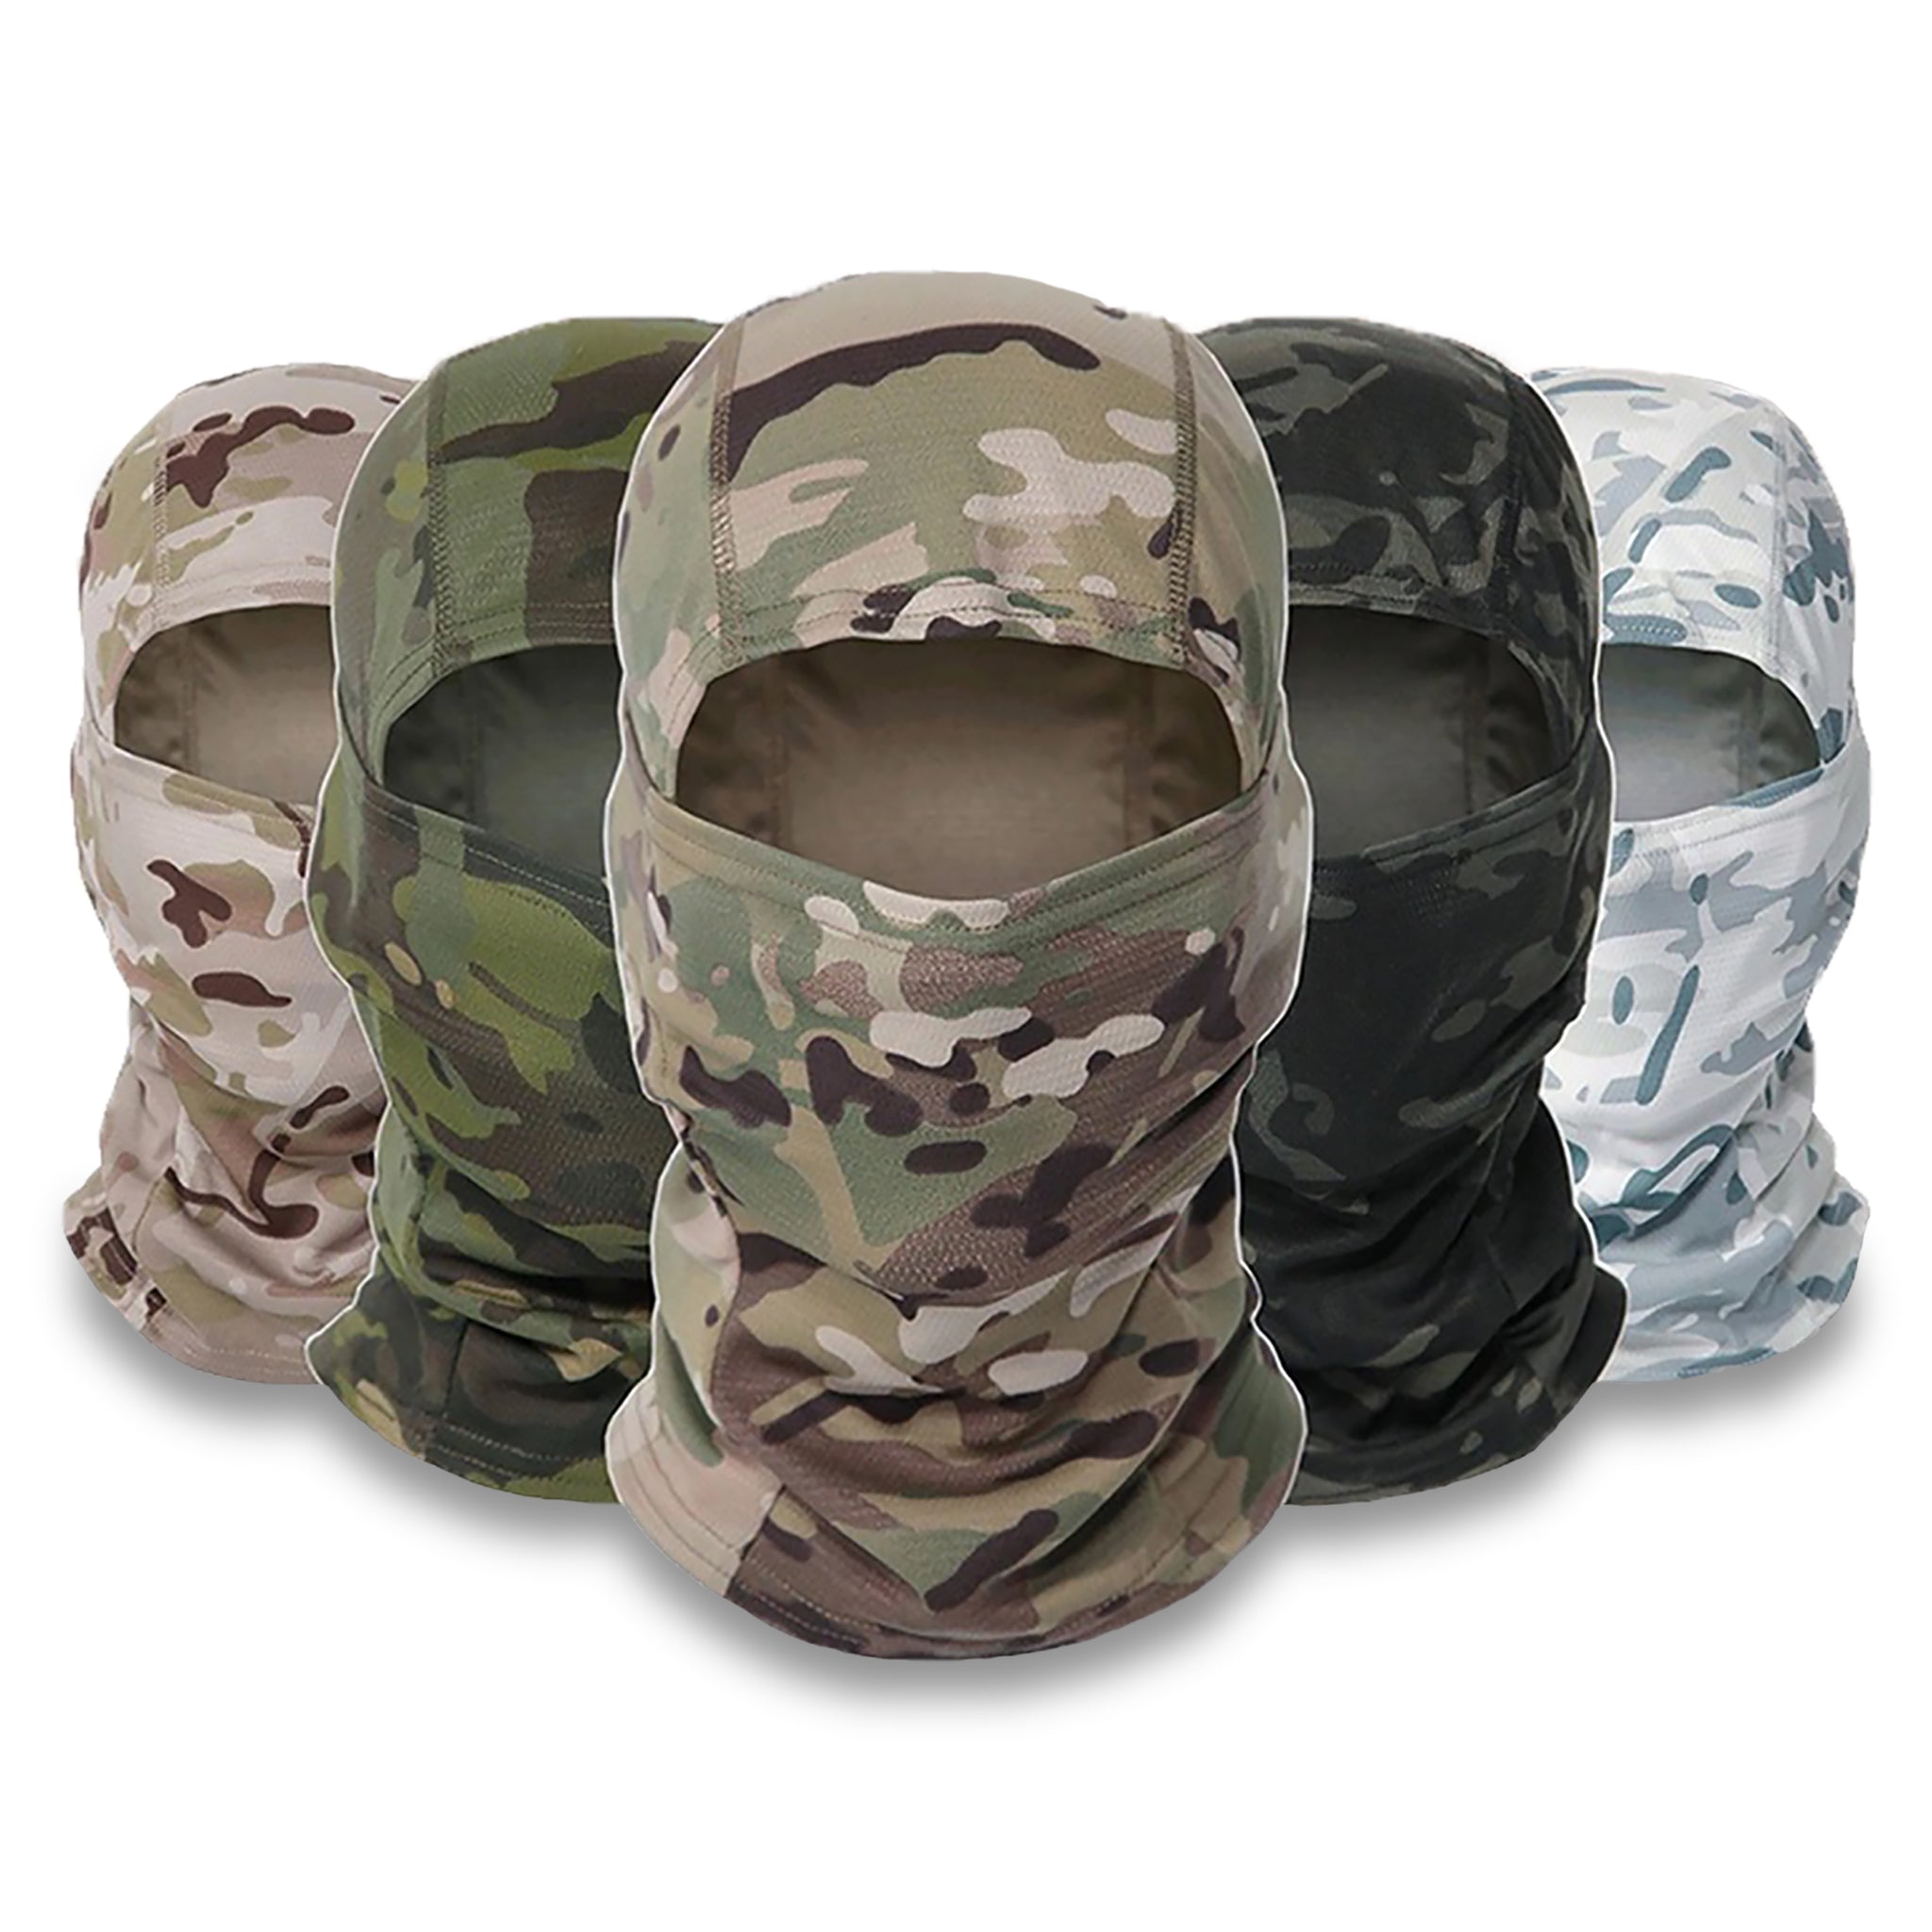 Huron - Full Face Cover | Tactical Airsoft Cap | Headband | Full face Cover